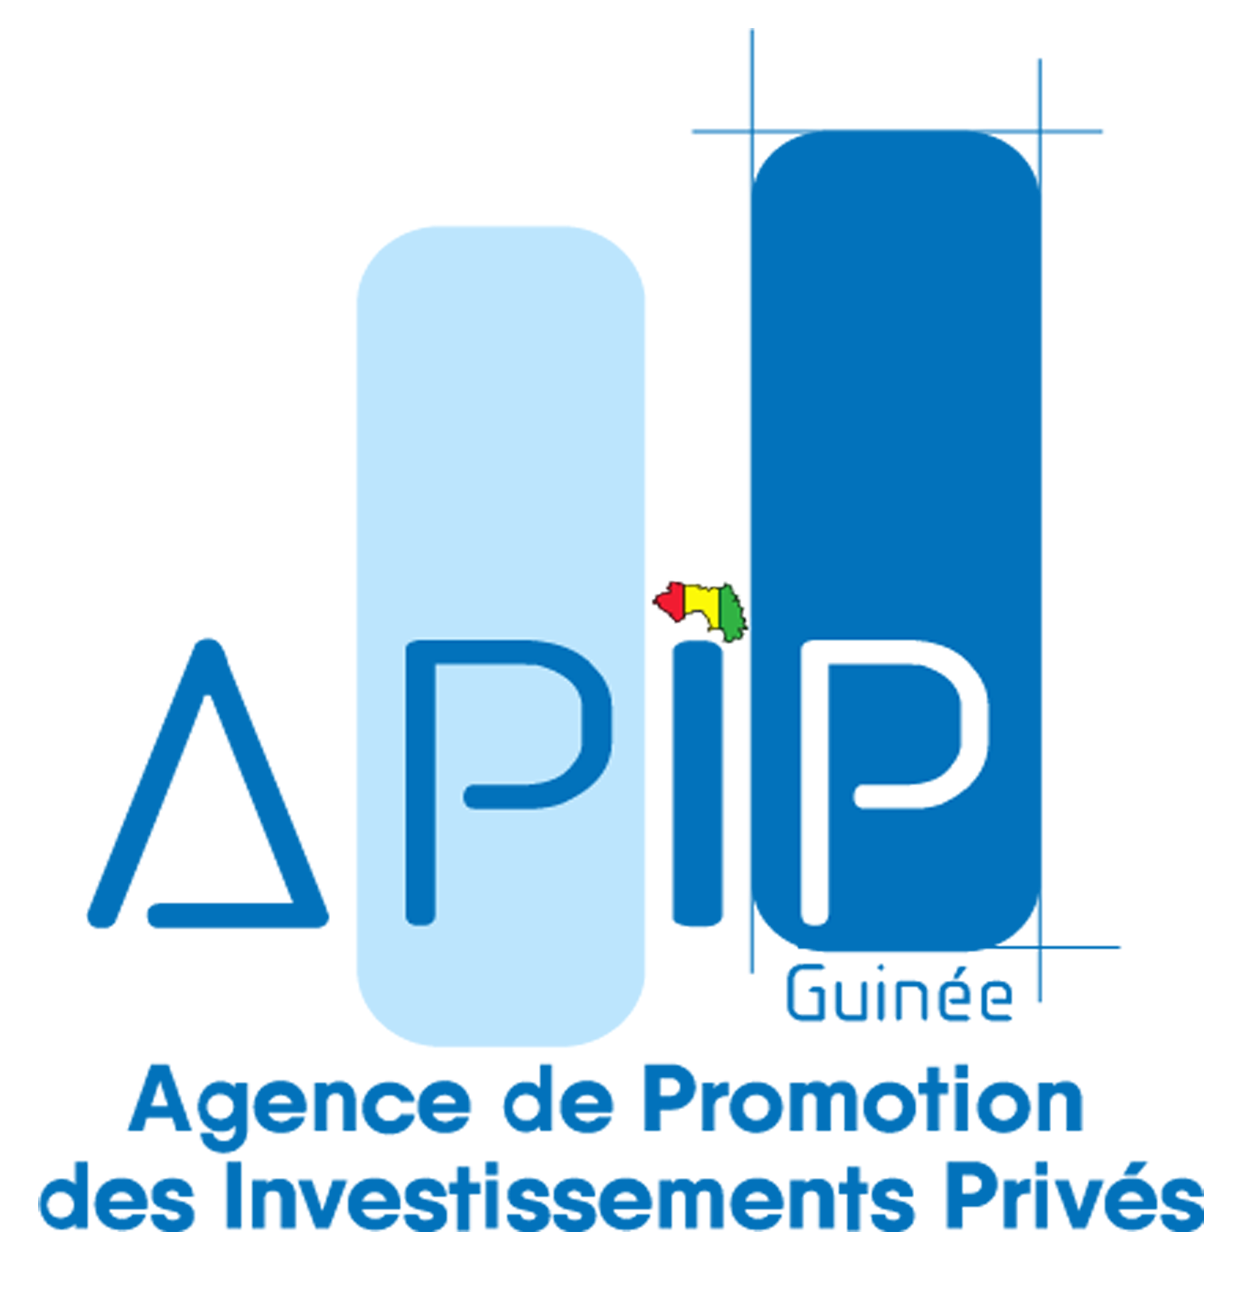 APIP-Guinea to meet the students of the General Lansana Conté University of Sonfonia